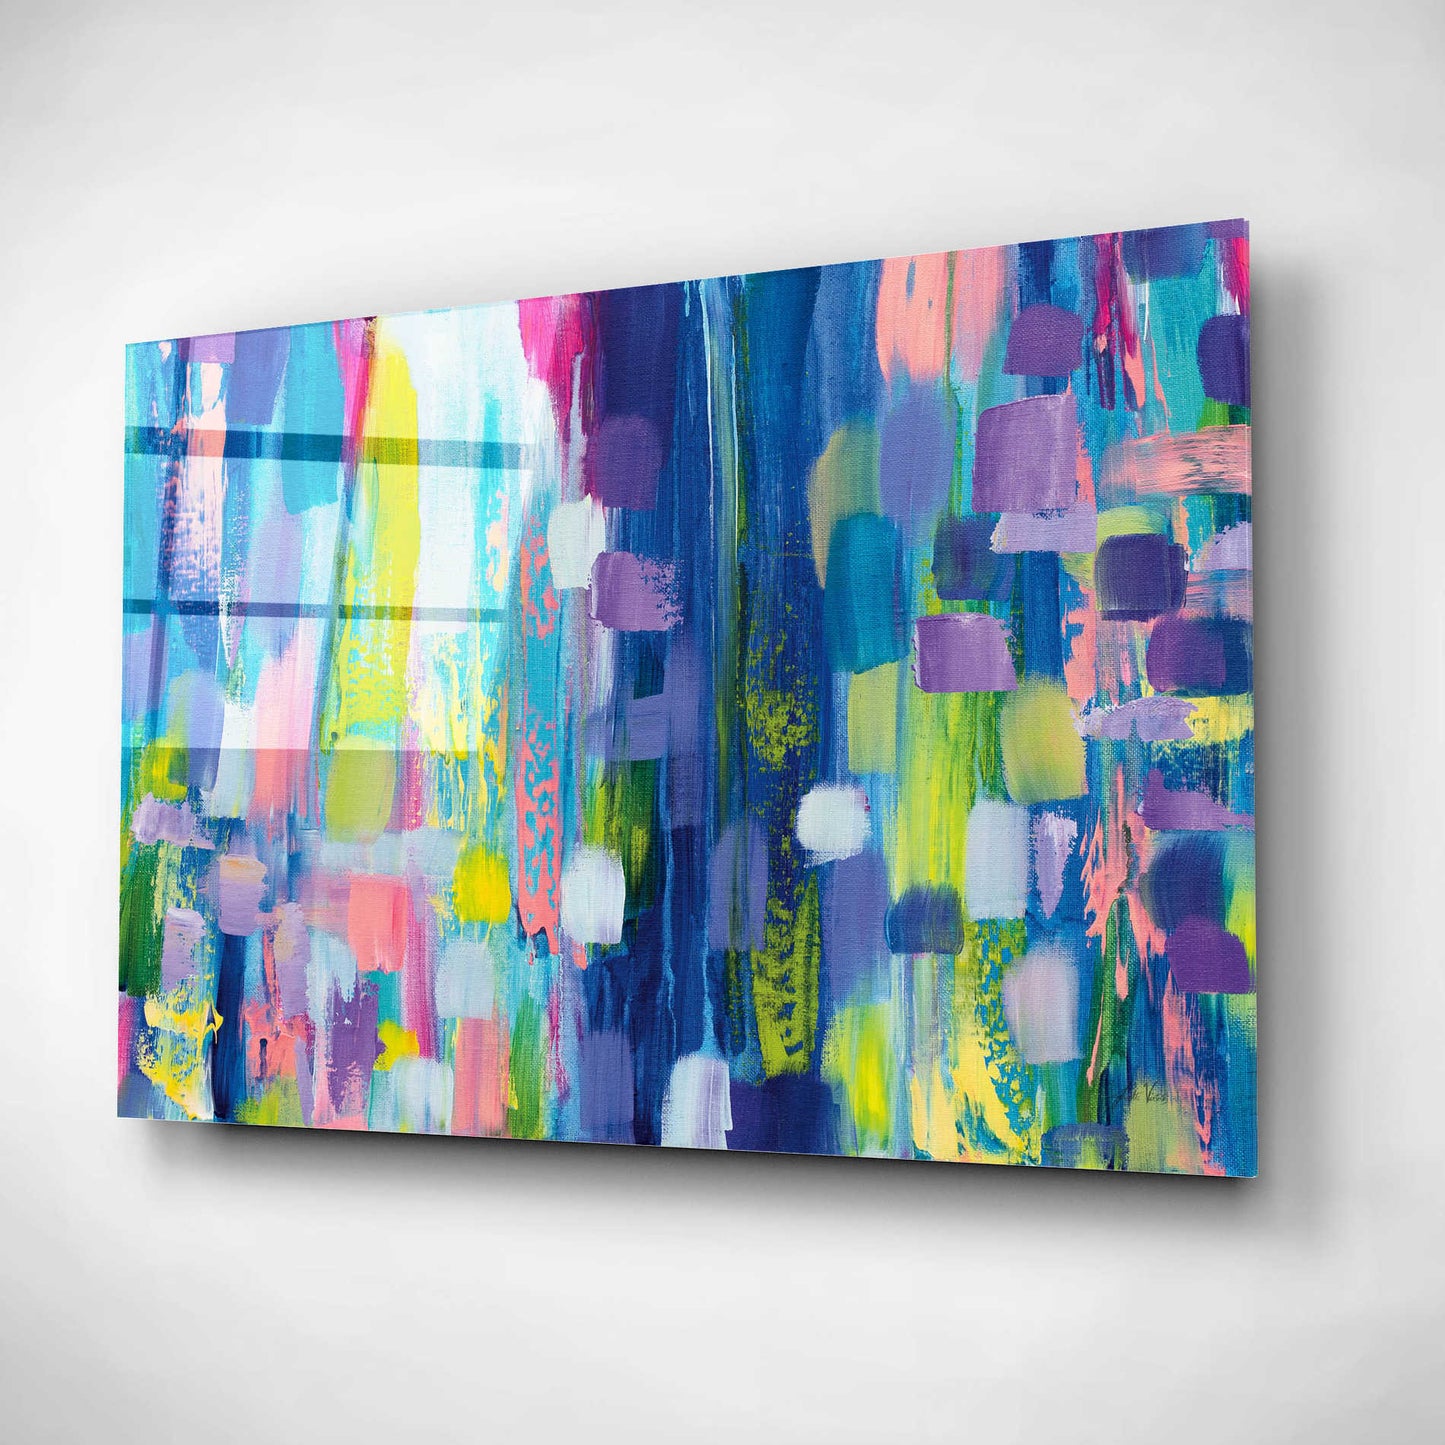 Epic Art 'Radiance' by Jeanette Vertentes, Acrylic Glass Wall Art,16x12